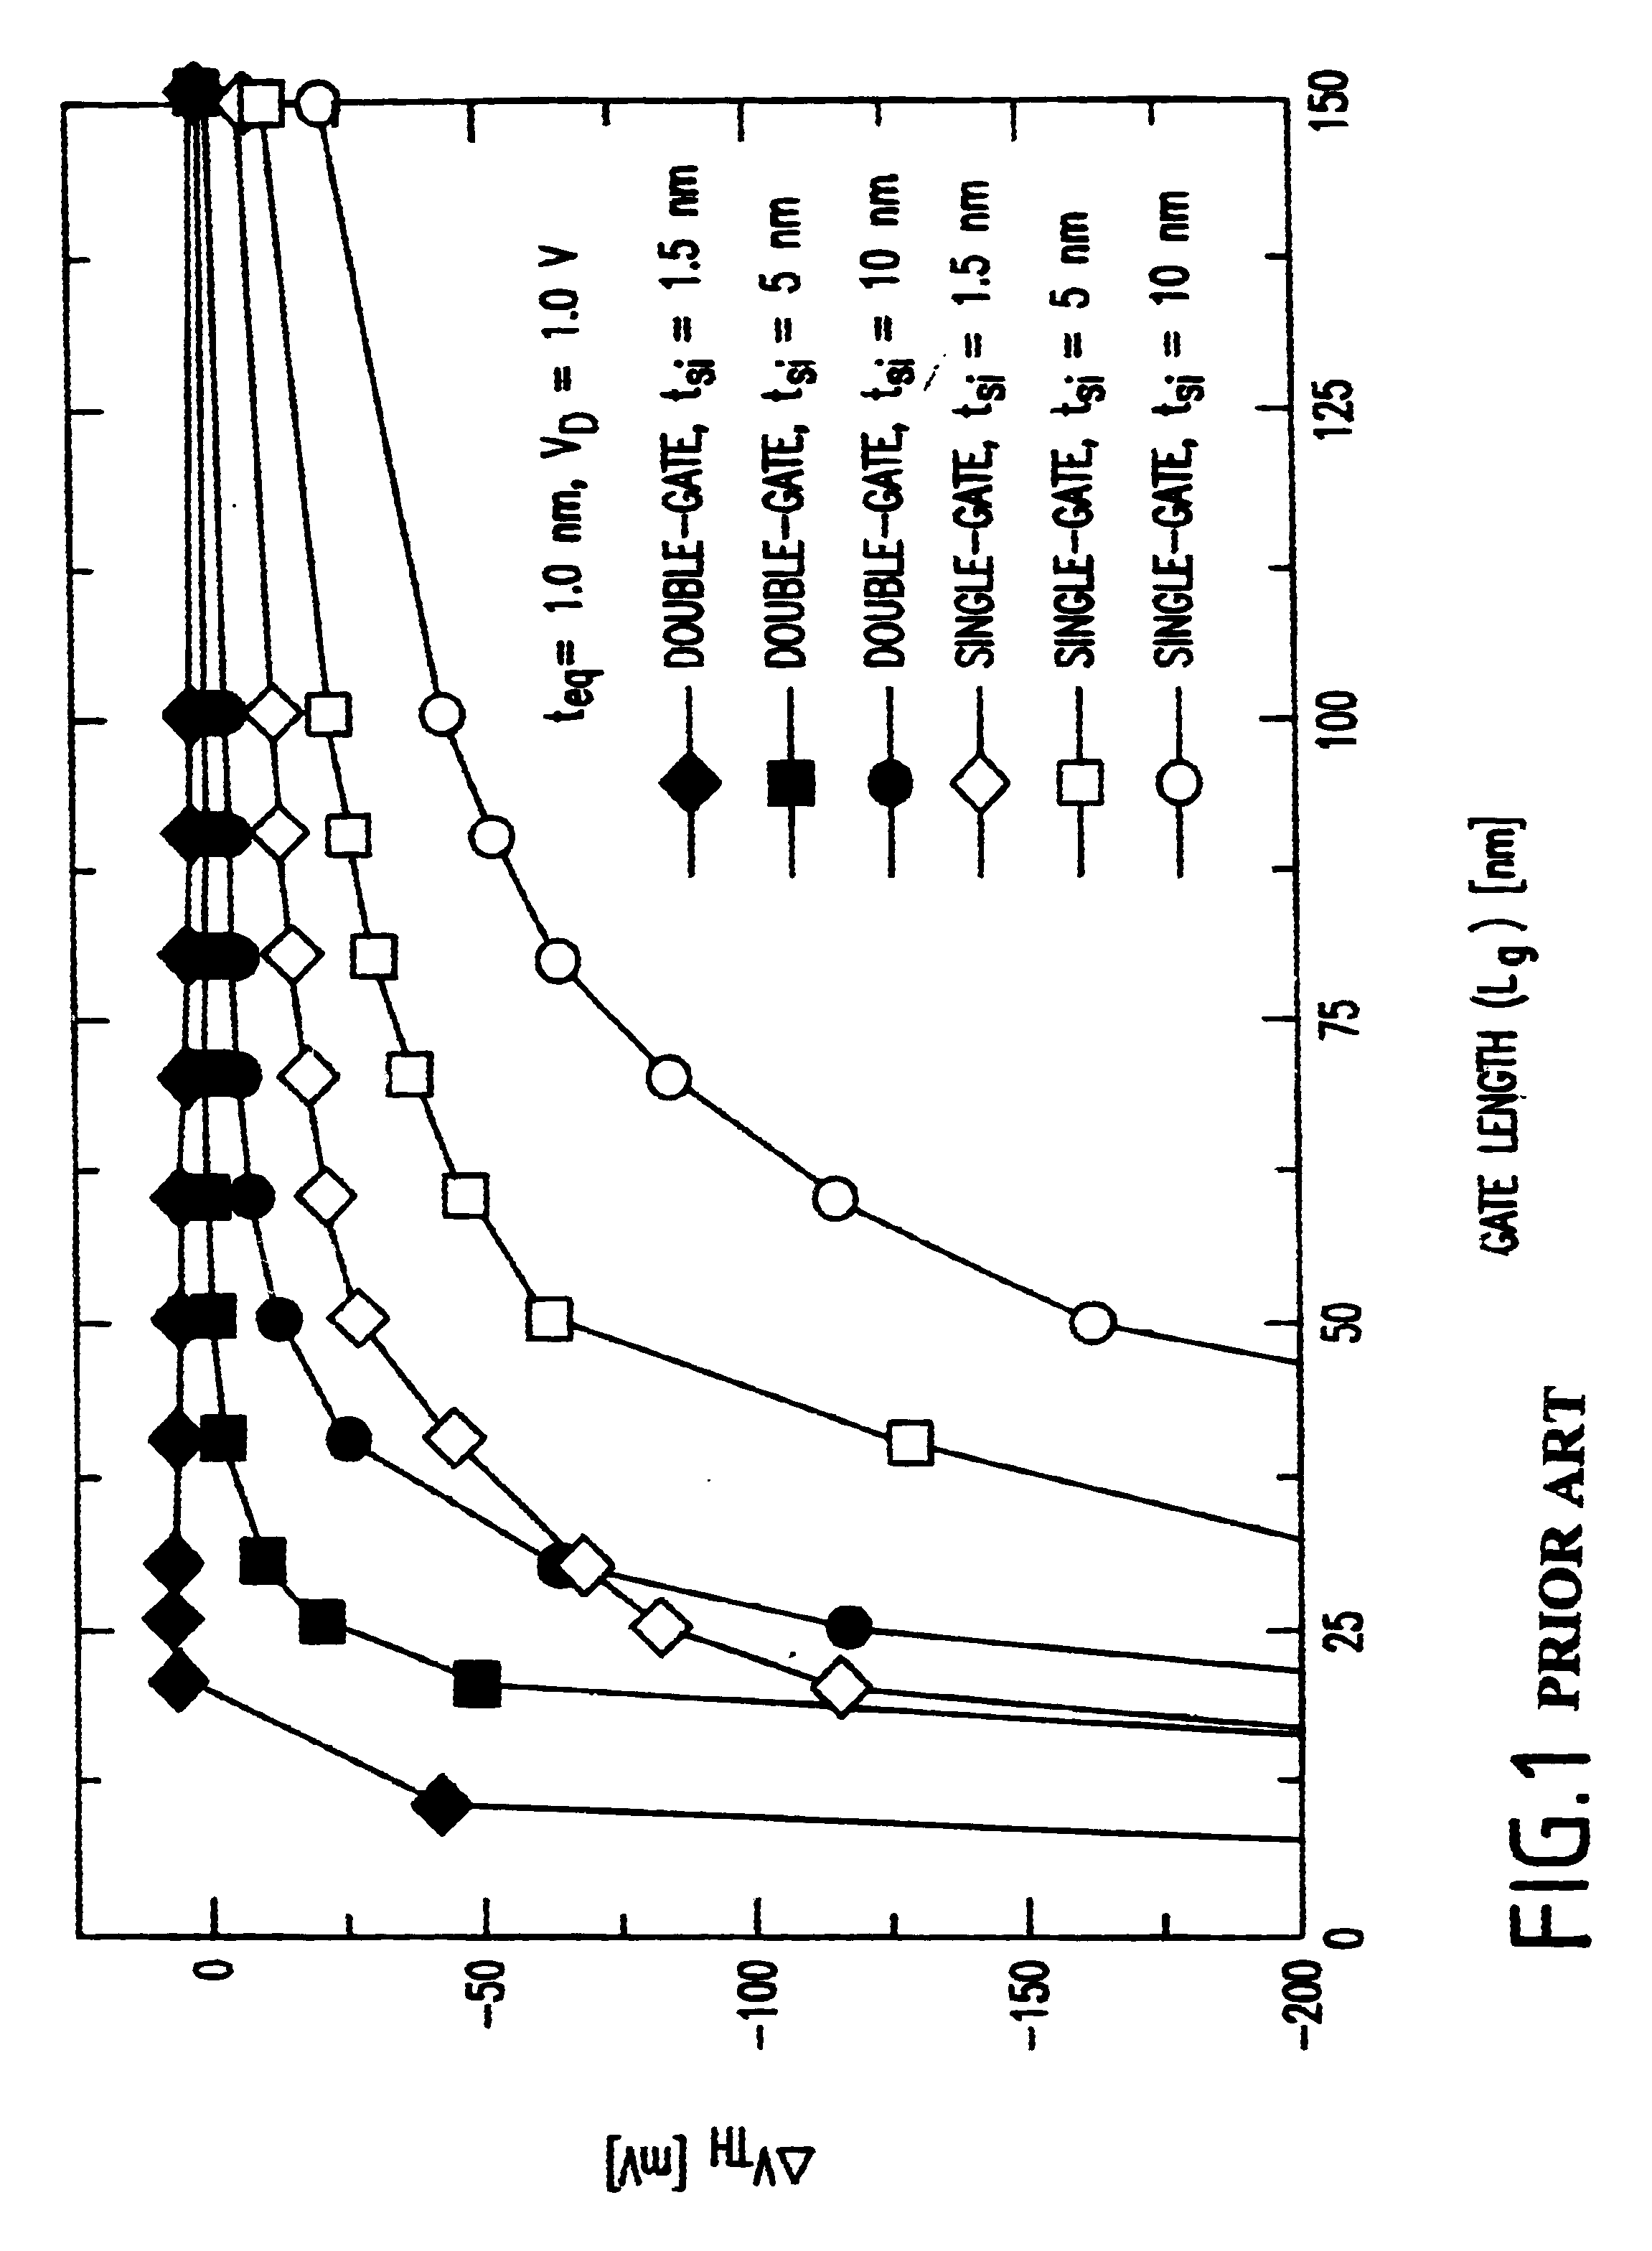 Self-aligned silicide process for silicon sidewall source and drain contacts